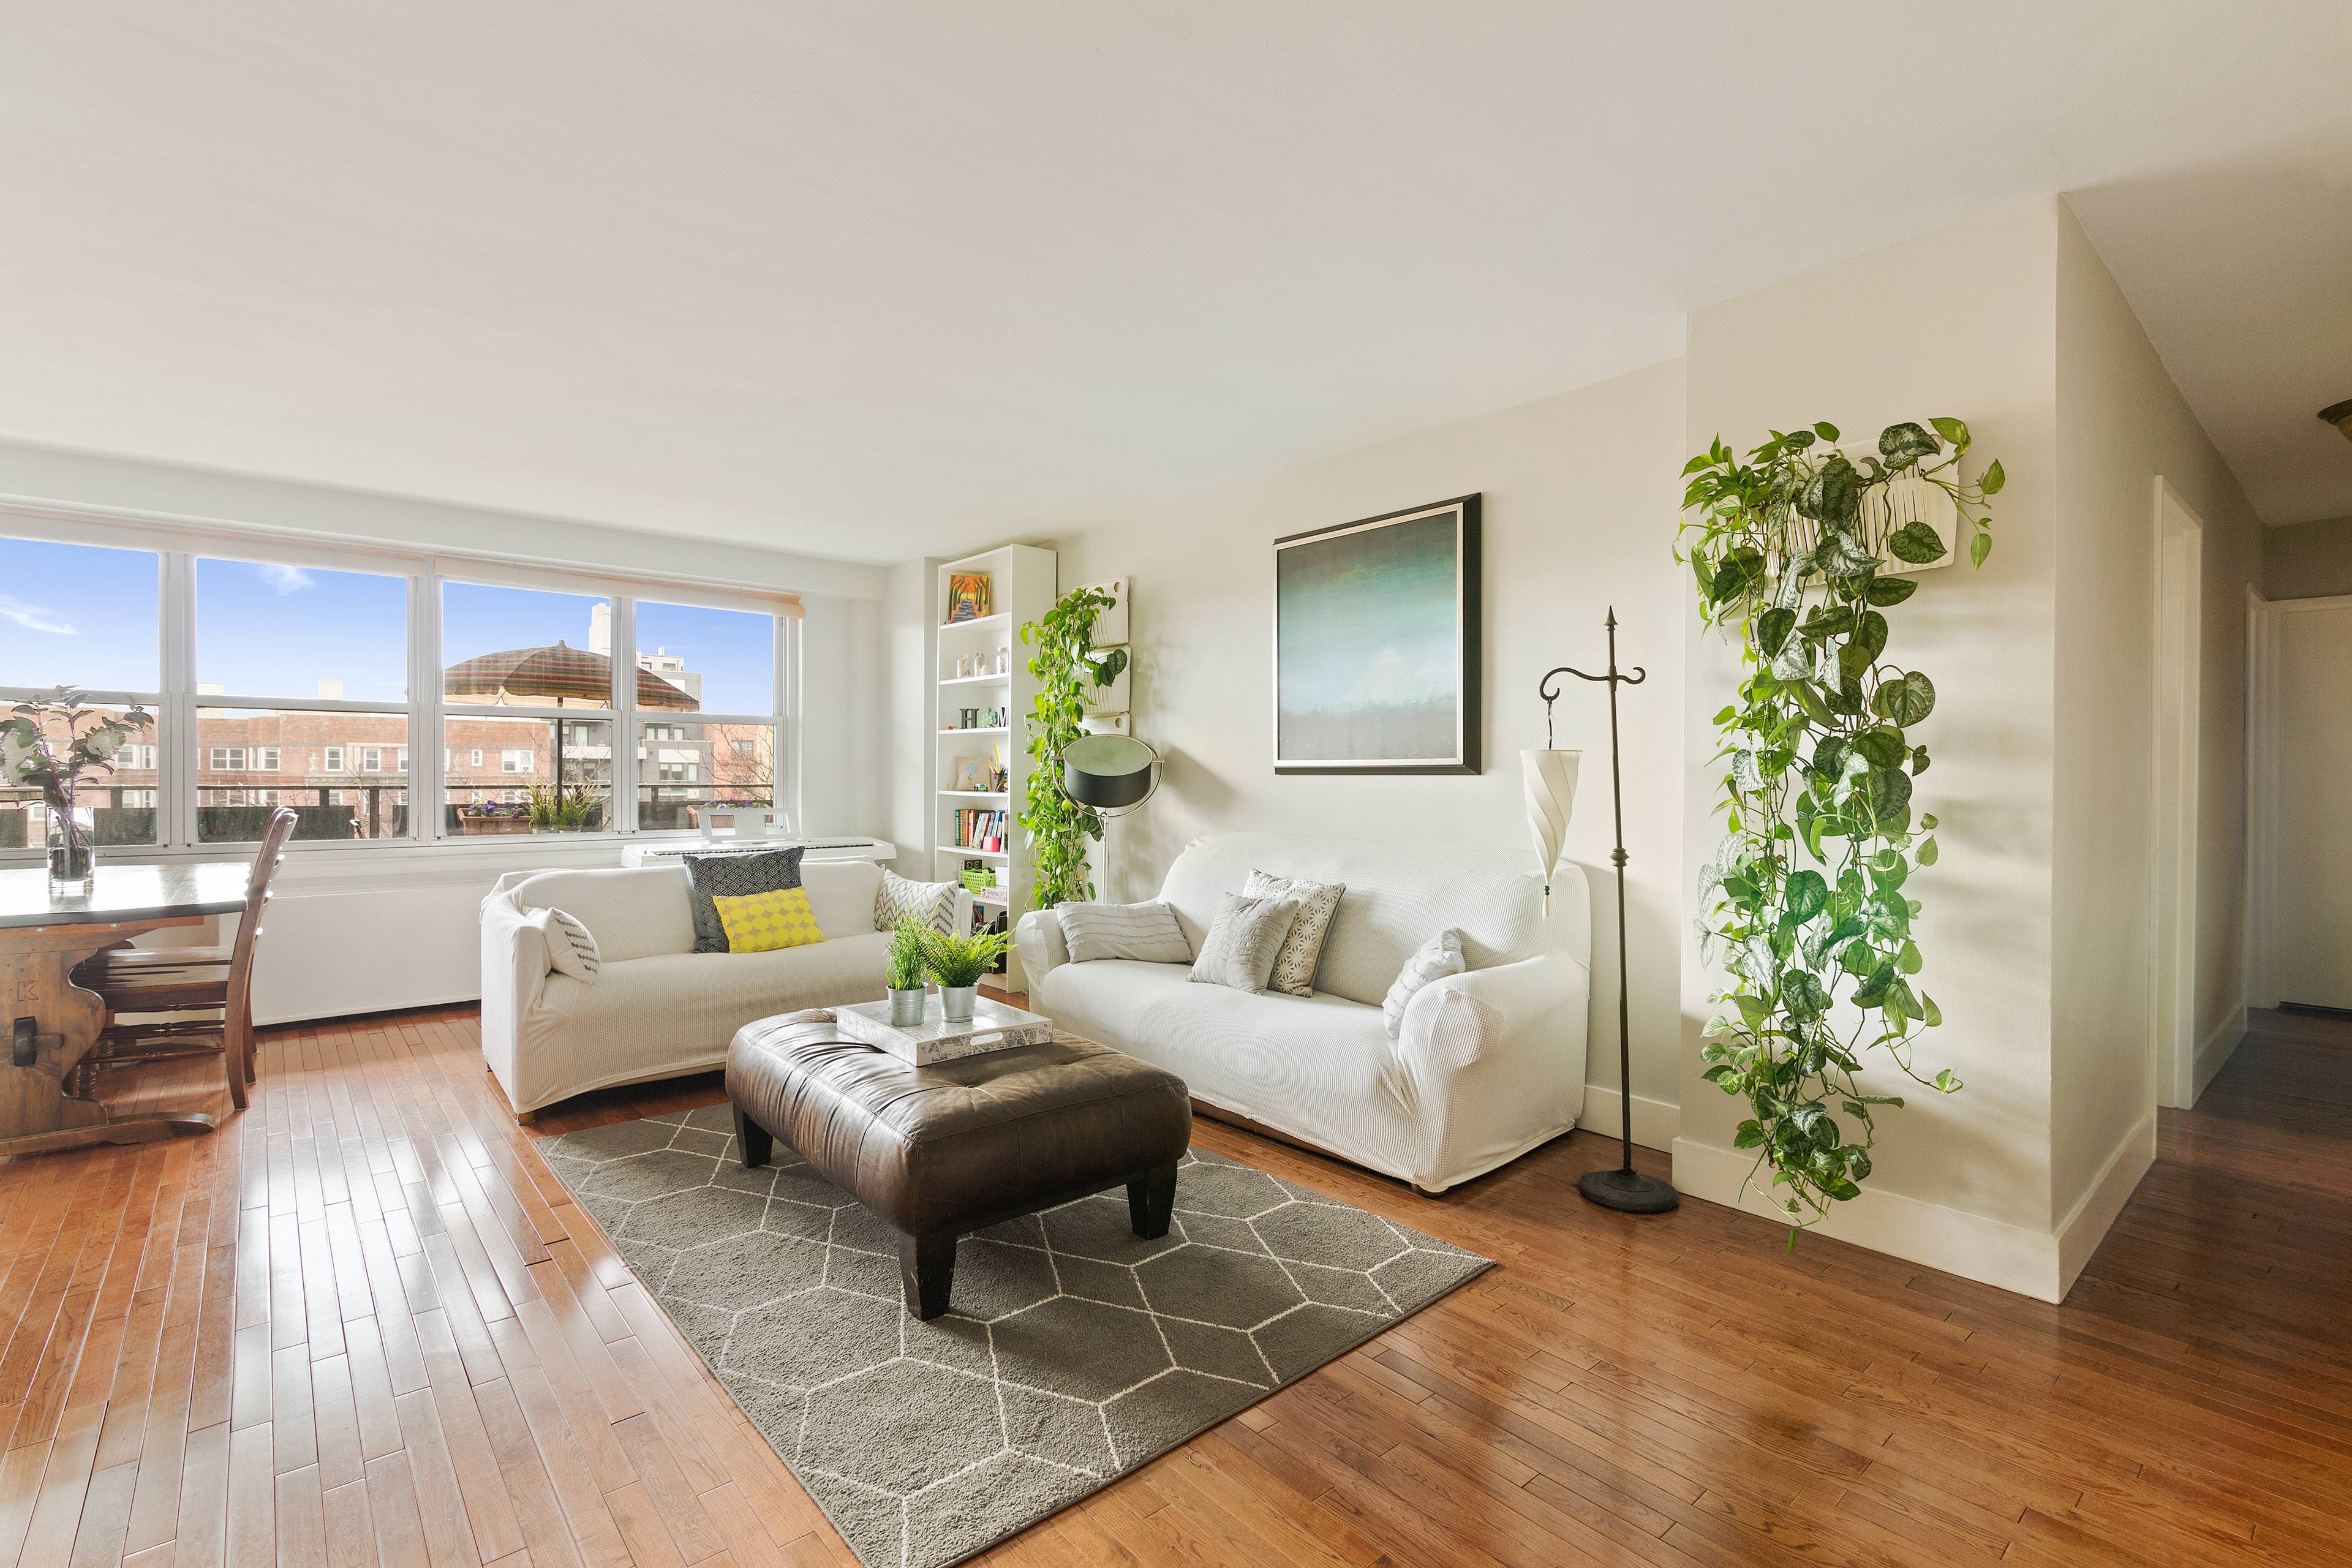 Private Terrace ! Spacious and bright 2 bed 2 bath, fully renovated apartment in a full service, doorman building located on the border of Kensington and Windsor Terrace.